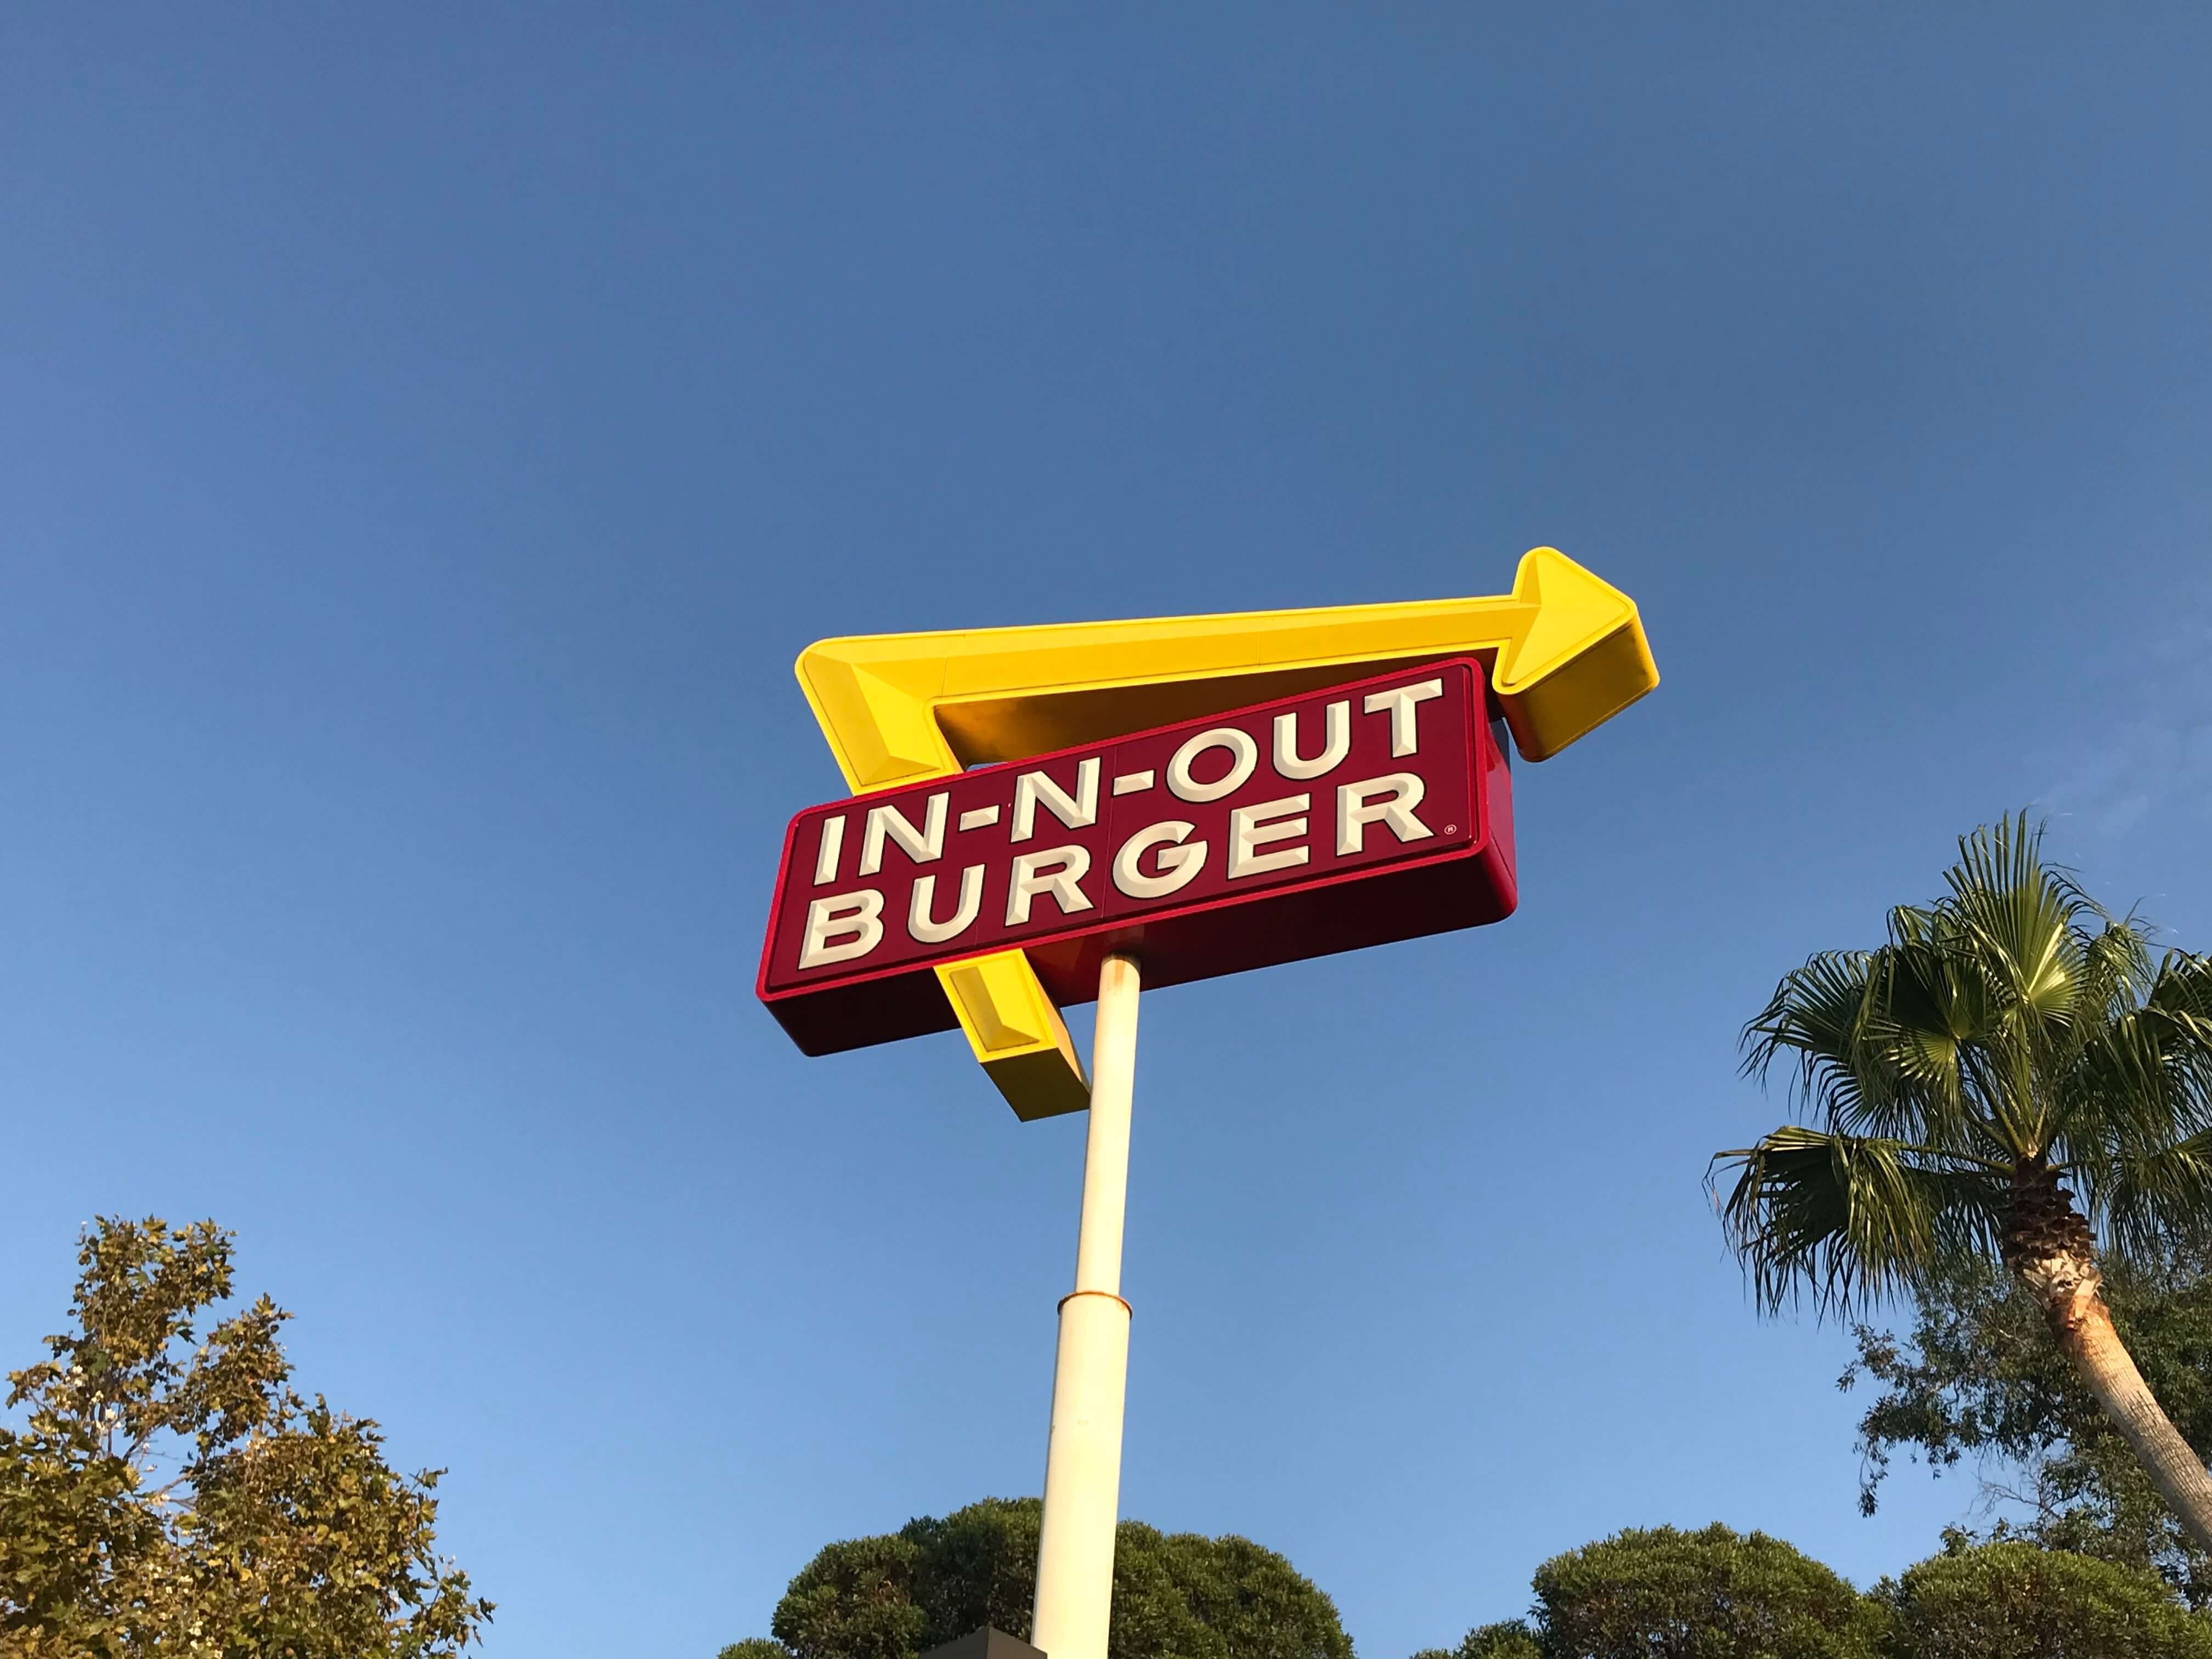 history of in-n-out